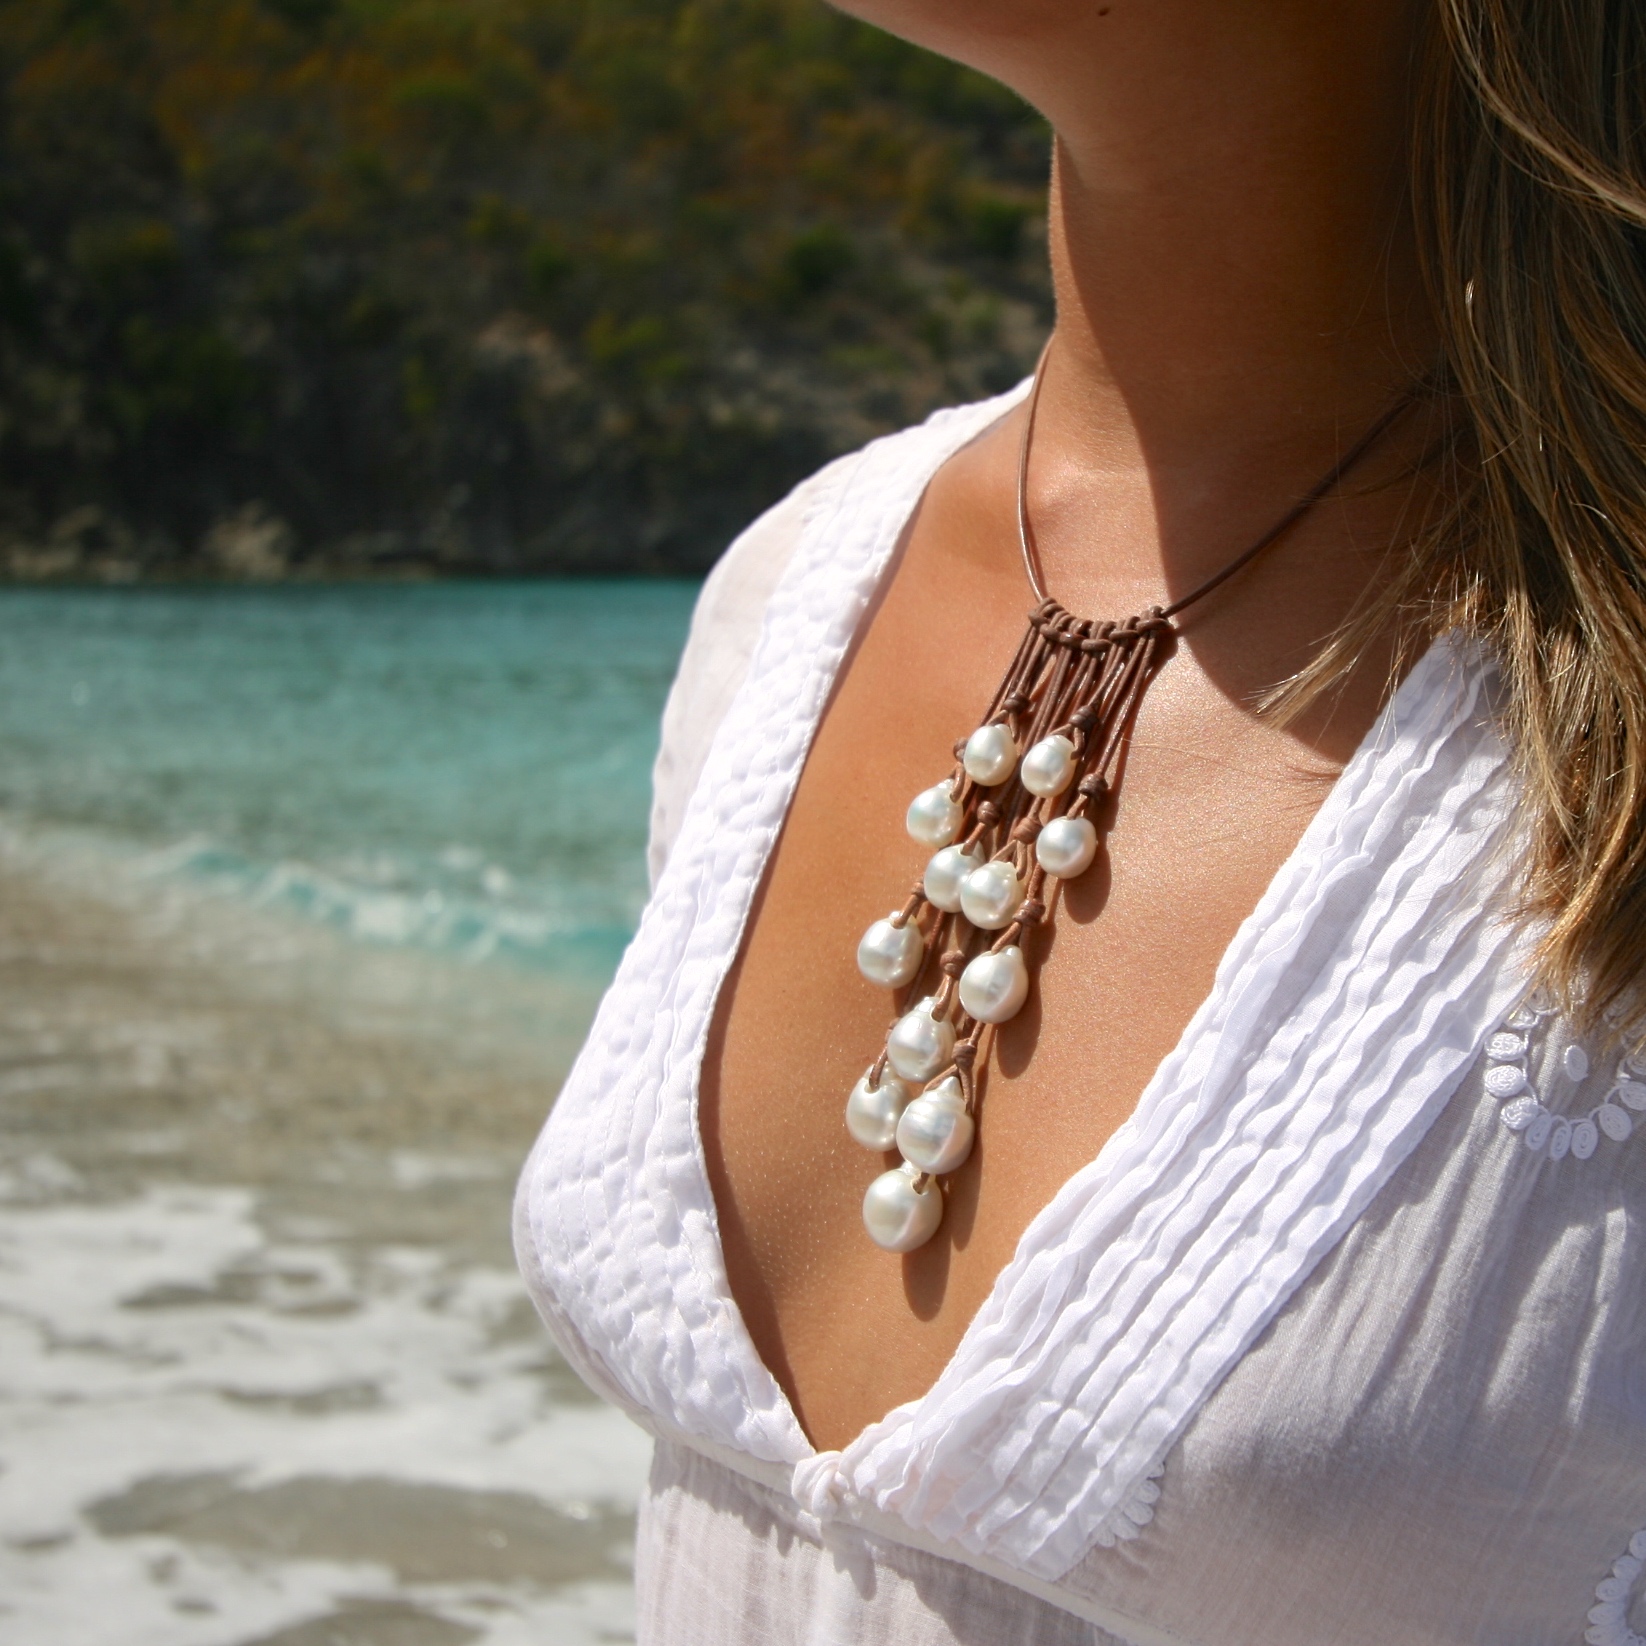 St Barth jewelry pearls necklace